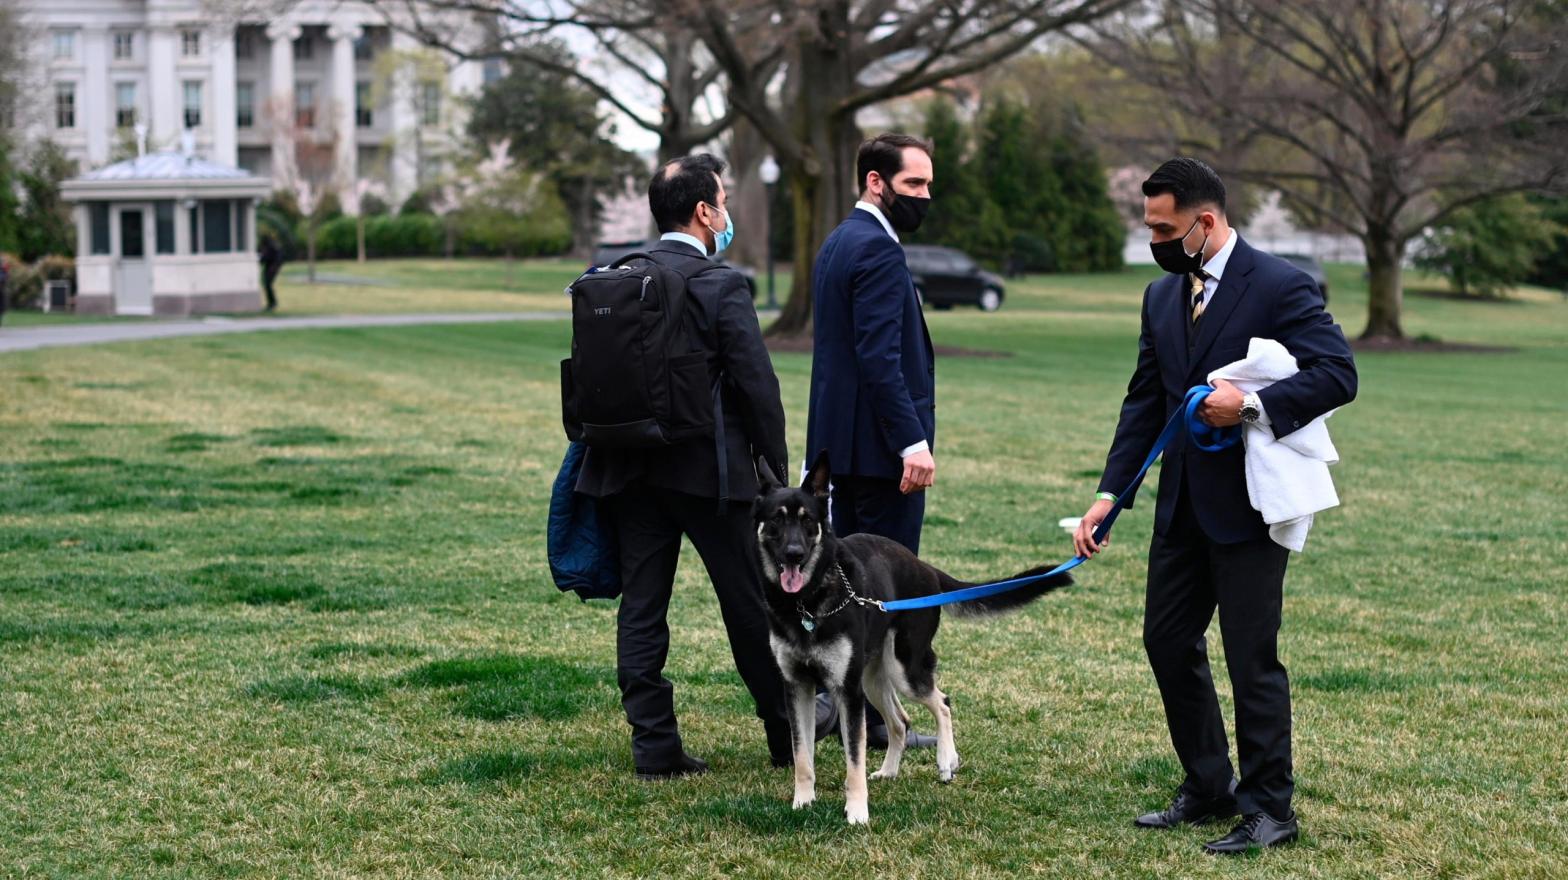 A handler walks Major, one of President Joe Biden and first lady Jill Biden's dogs, on the South Lawn of the White House in Washington, Wednesday, March 31, 2021.  (Photo: Mandel Ngan/Pool, AP)